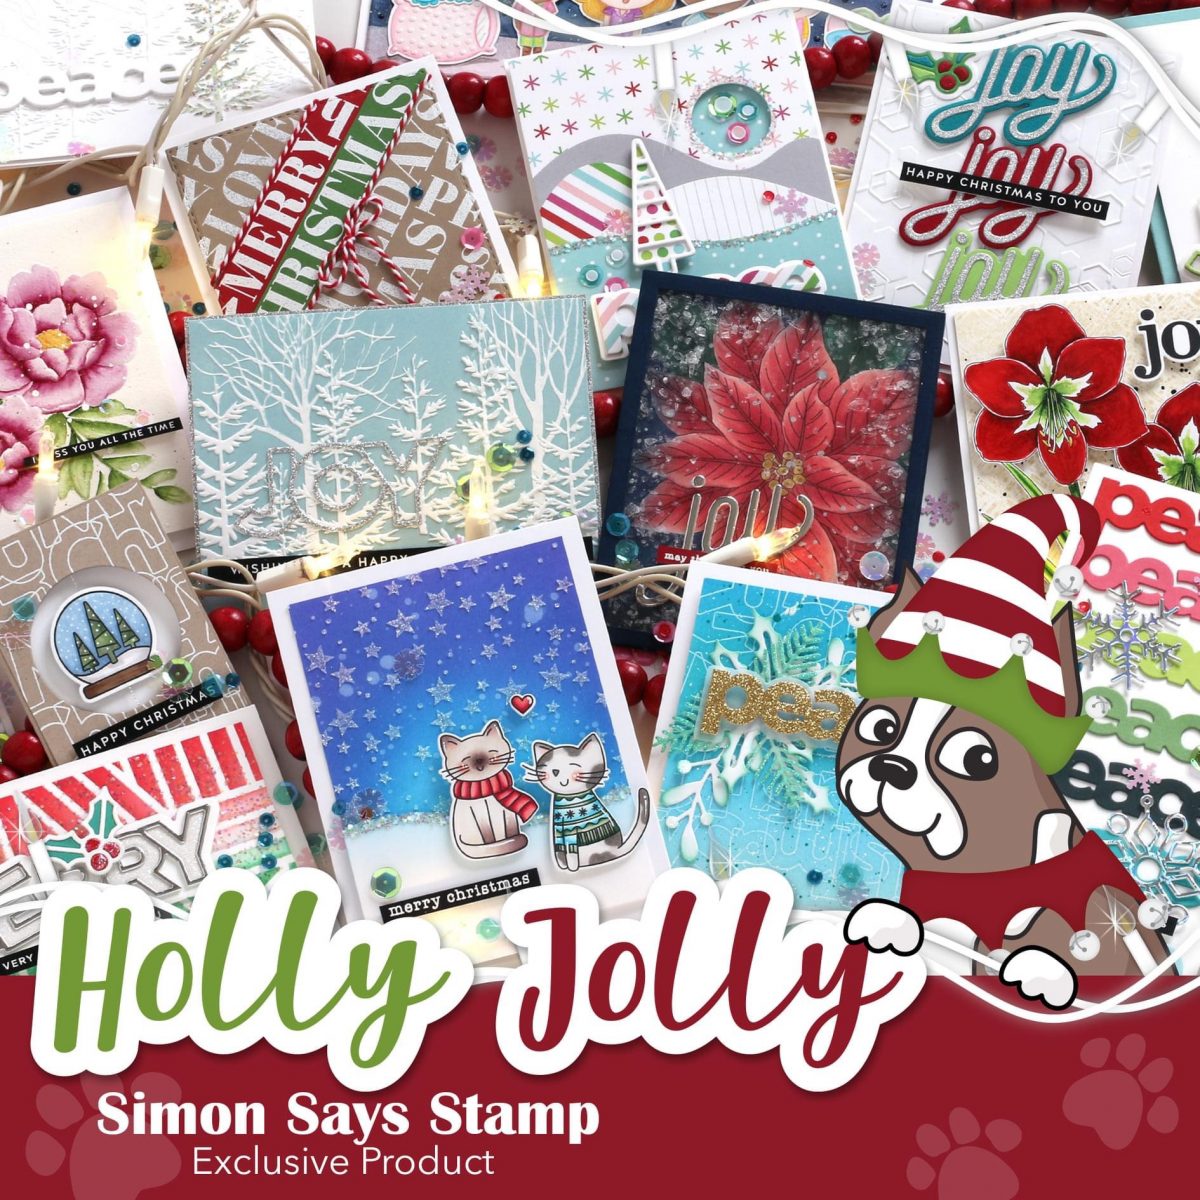 Holly Jolly Release – SSS